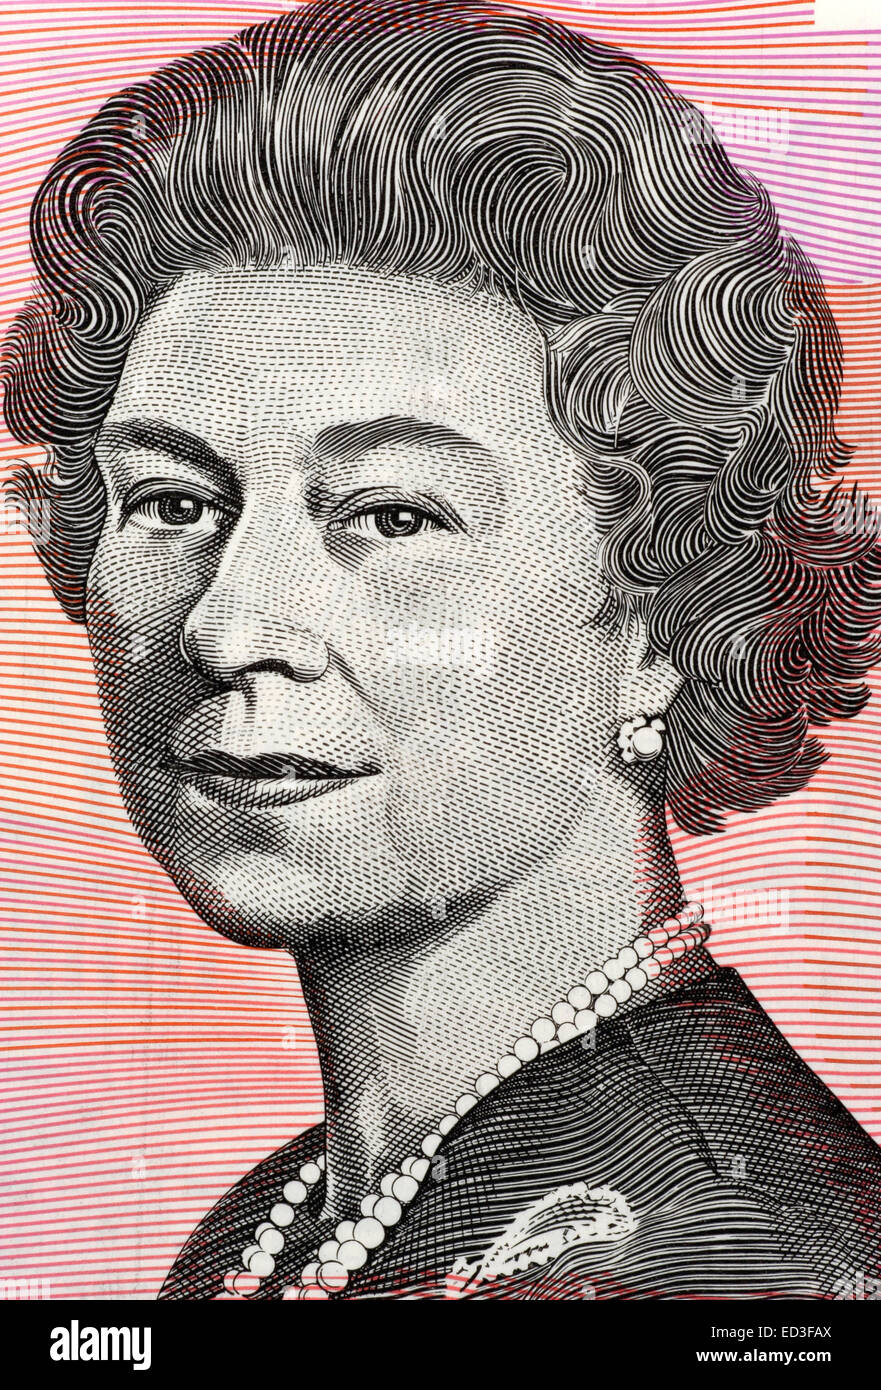 Queen Elizabeth II  (born 1926) on 5 Dollars 1992 banknote from Australia. Queen of the United Kingdom. Stock Photo